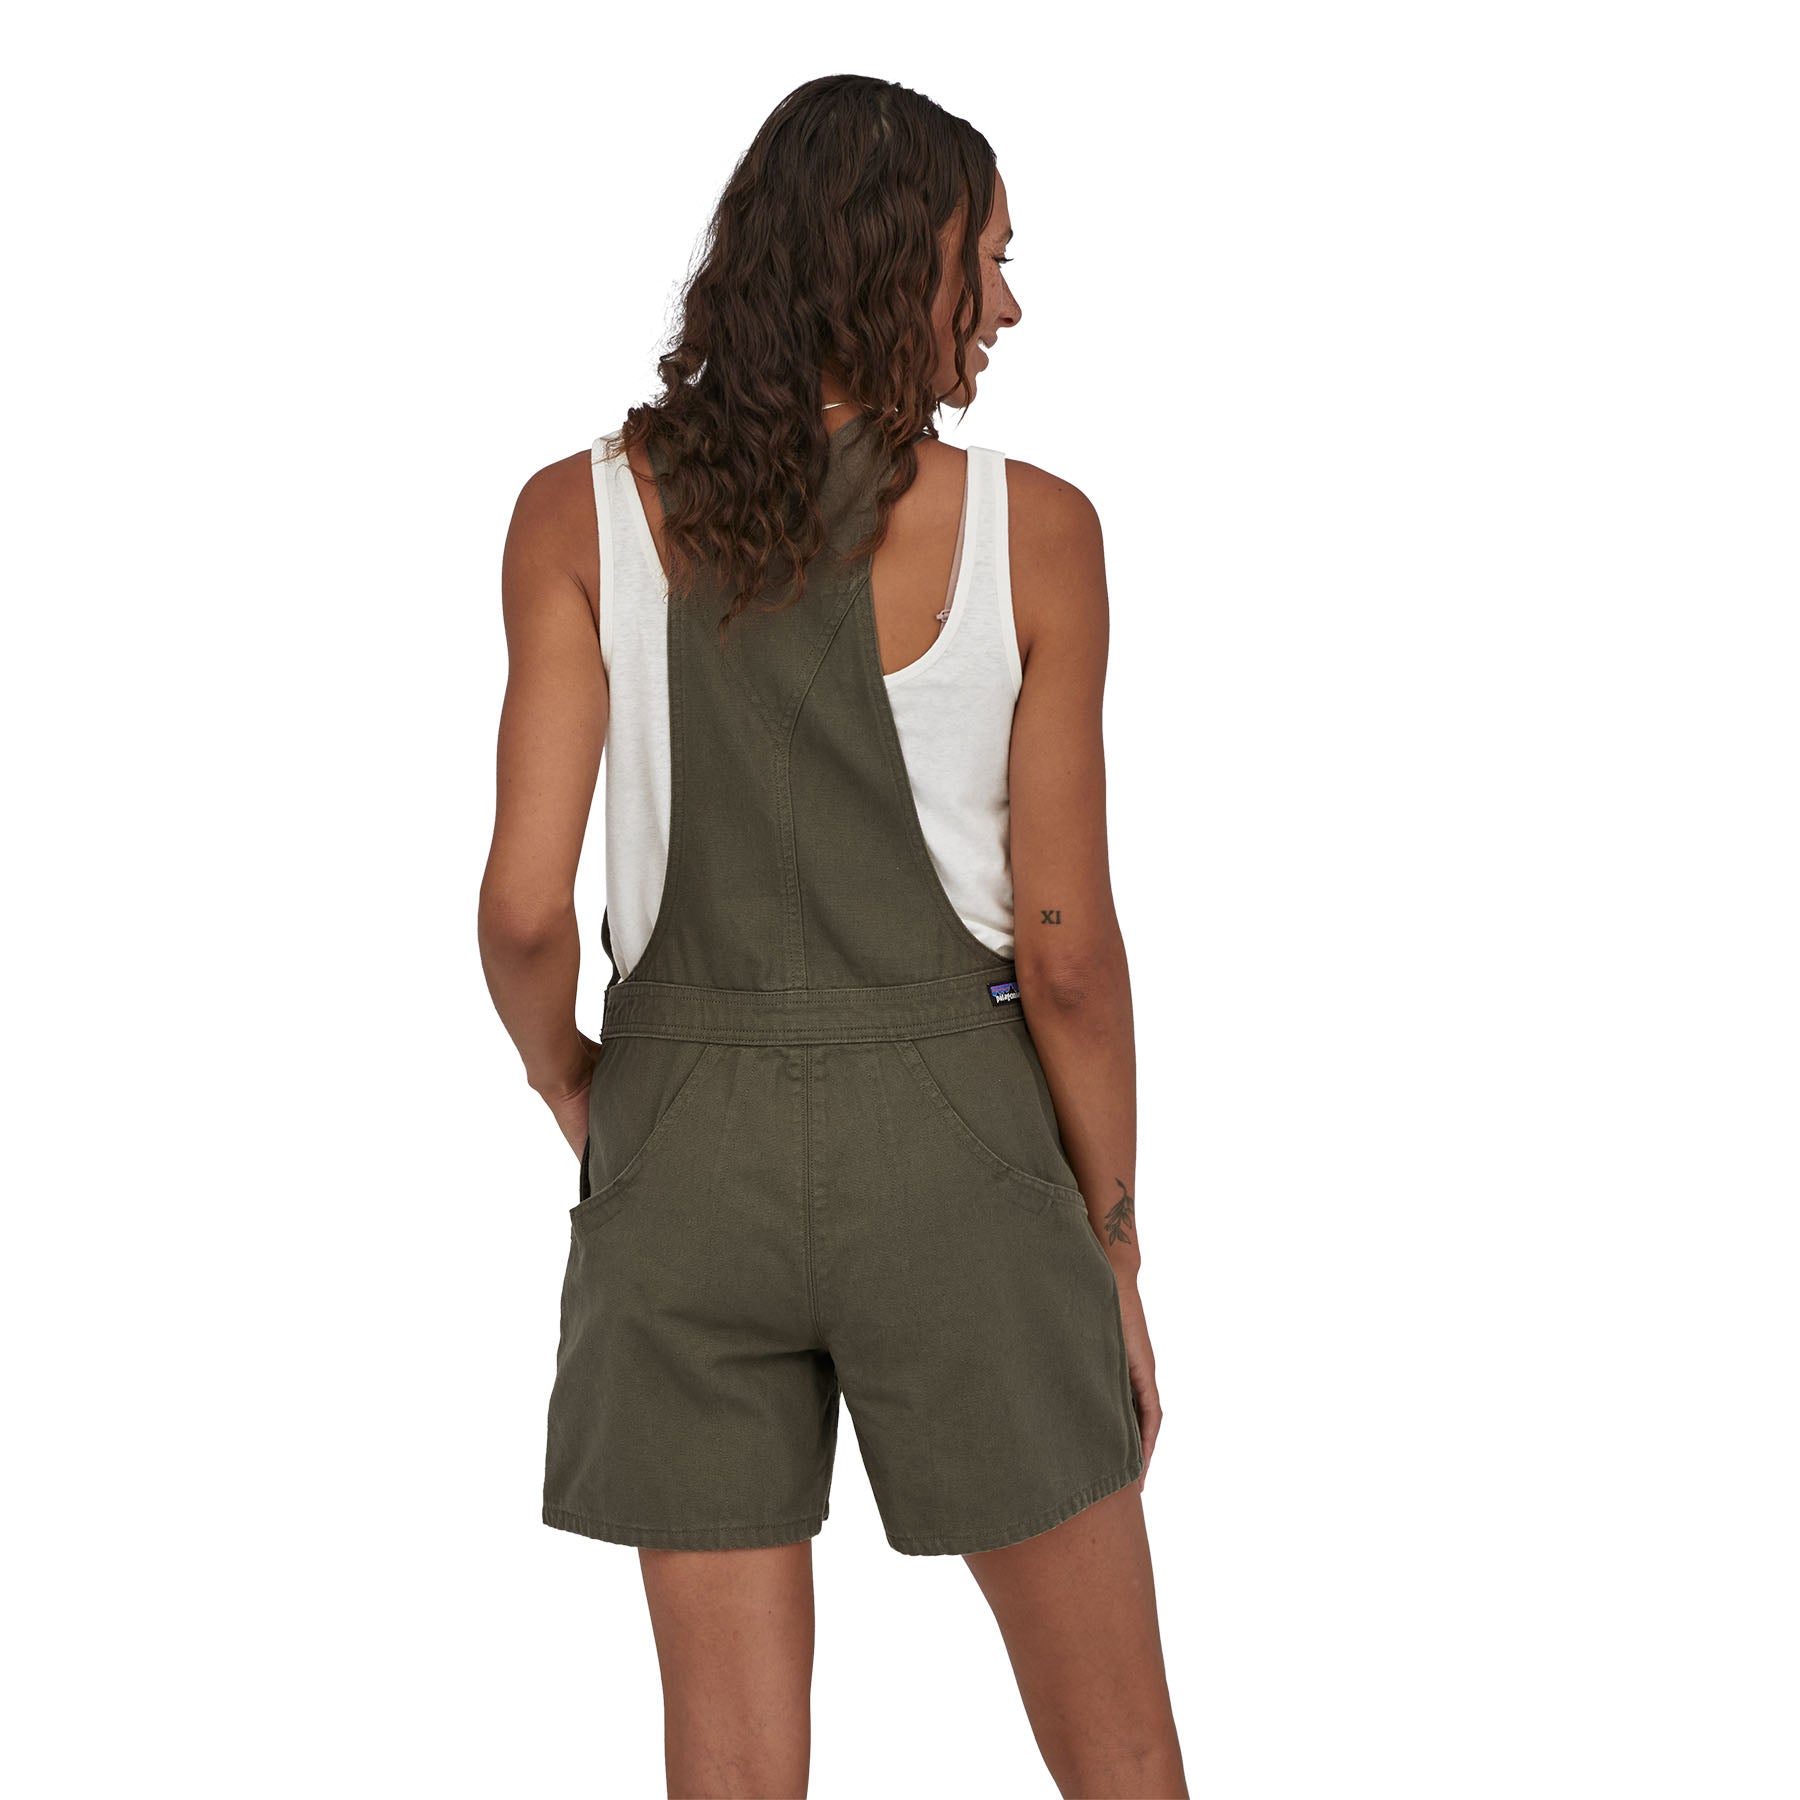 Women's Stand Up® Overalls - 5"